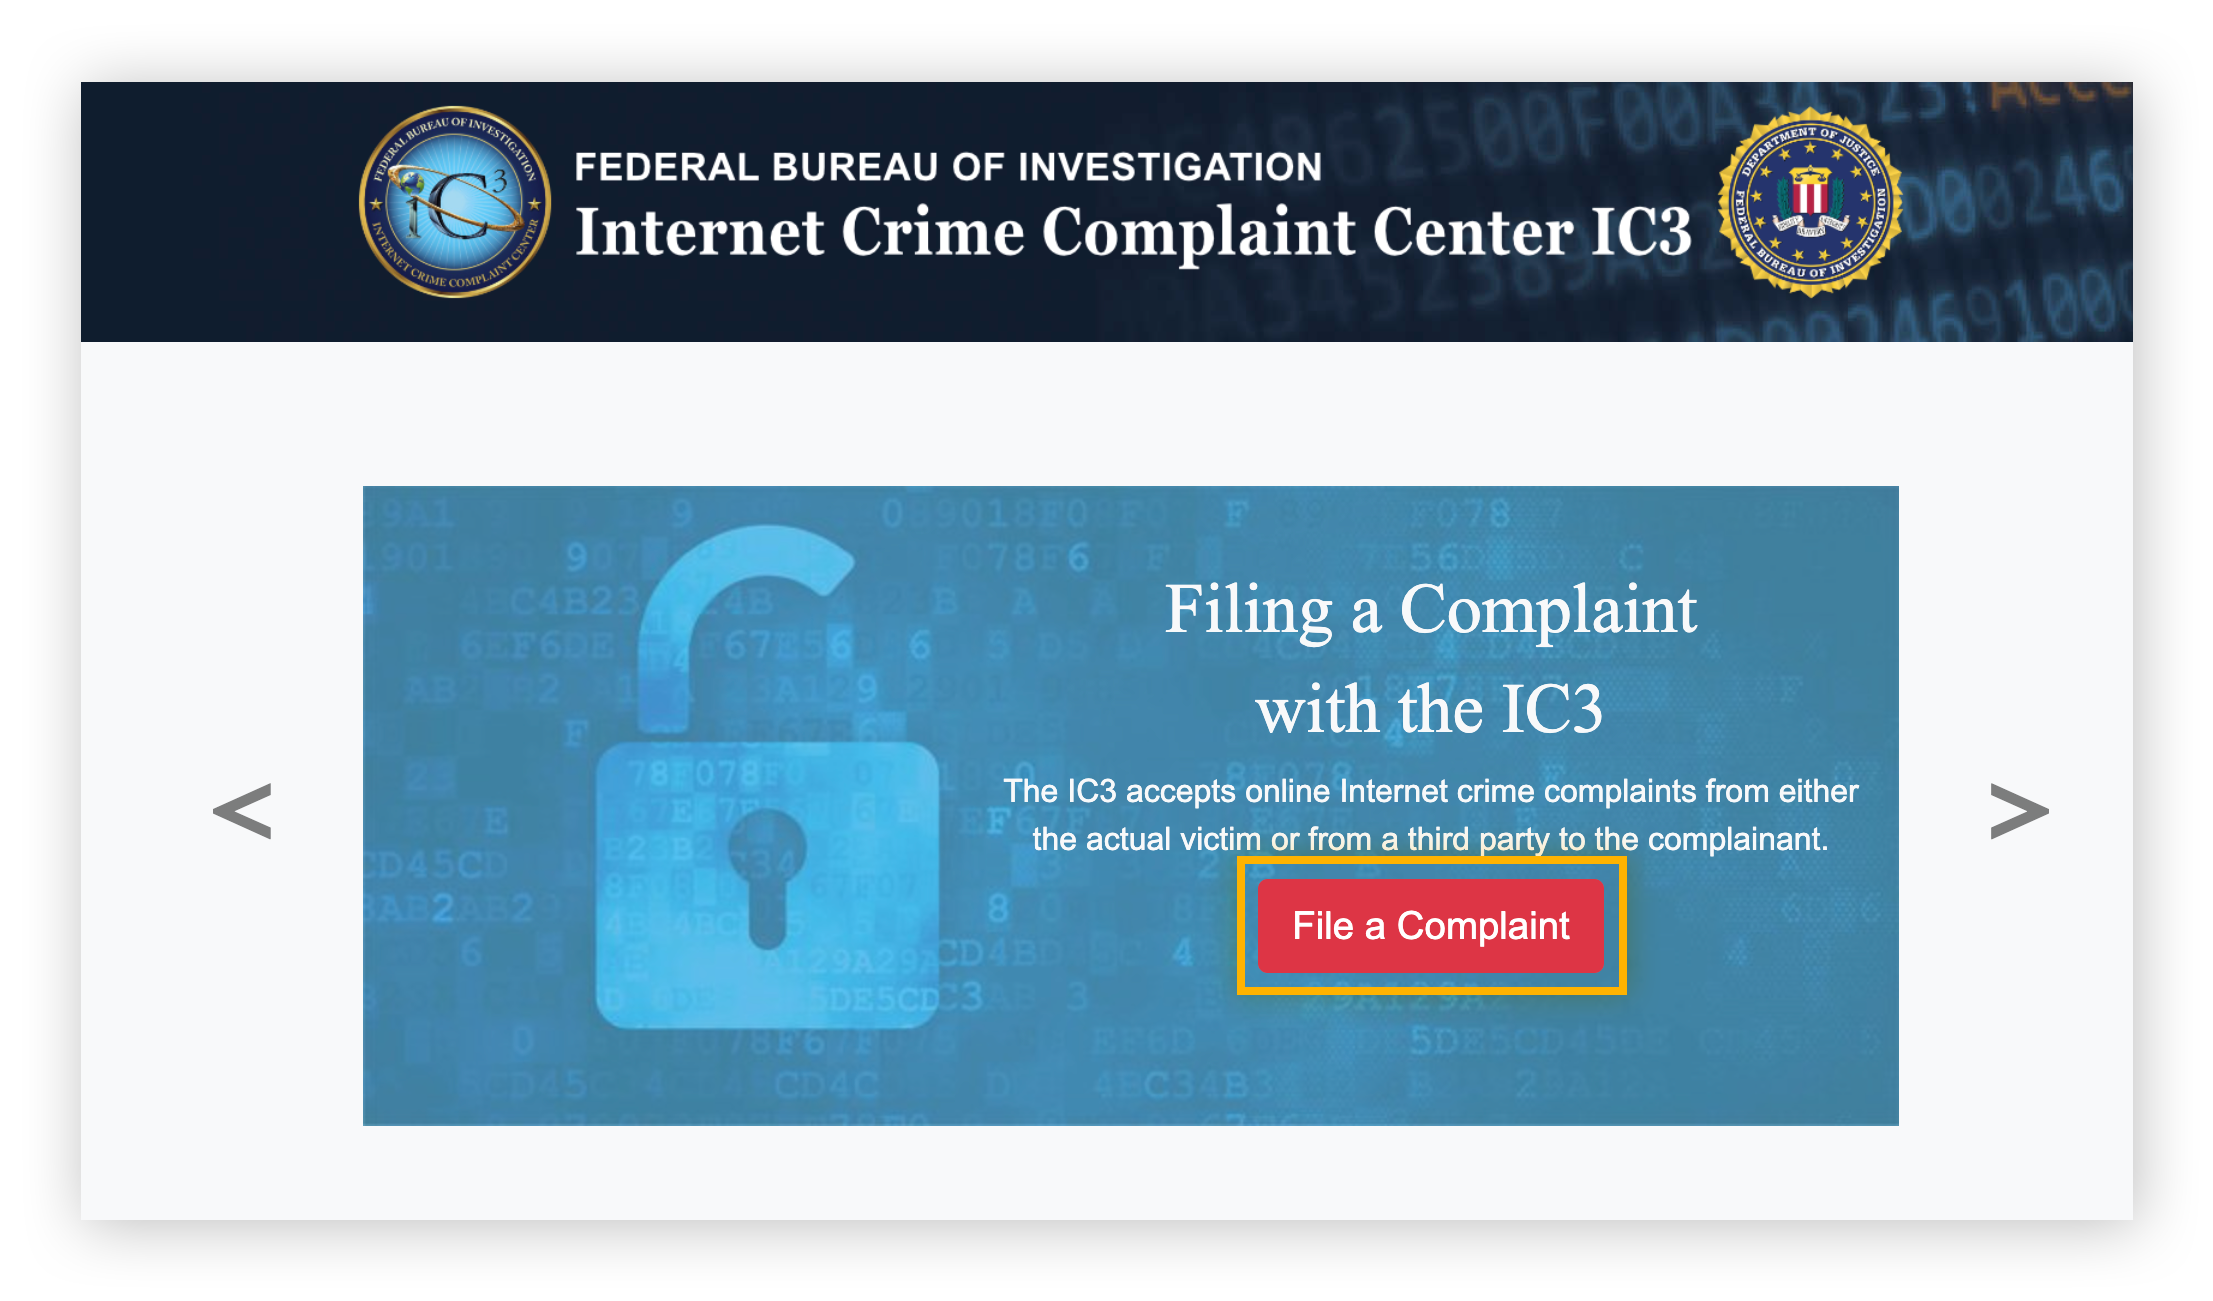 File an internet crime with the IC3 using their File a Complaint form.